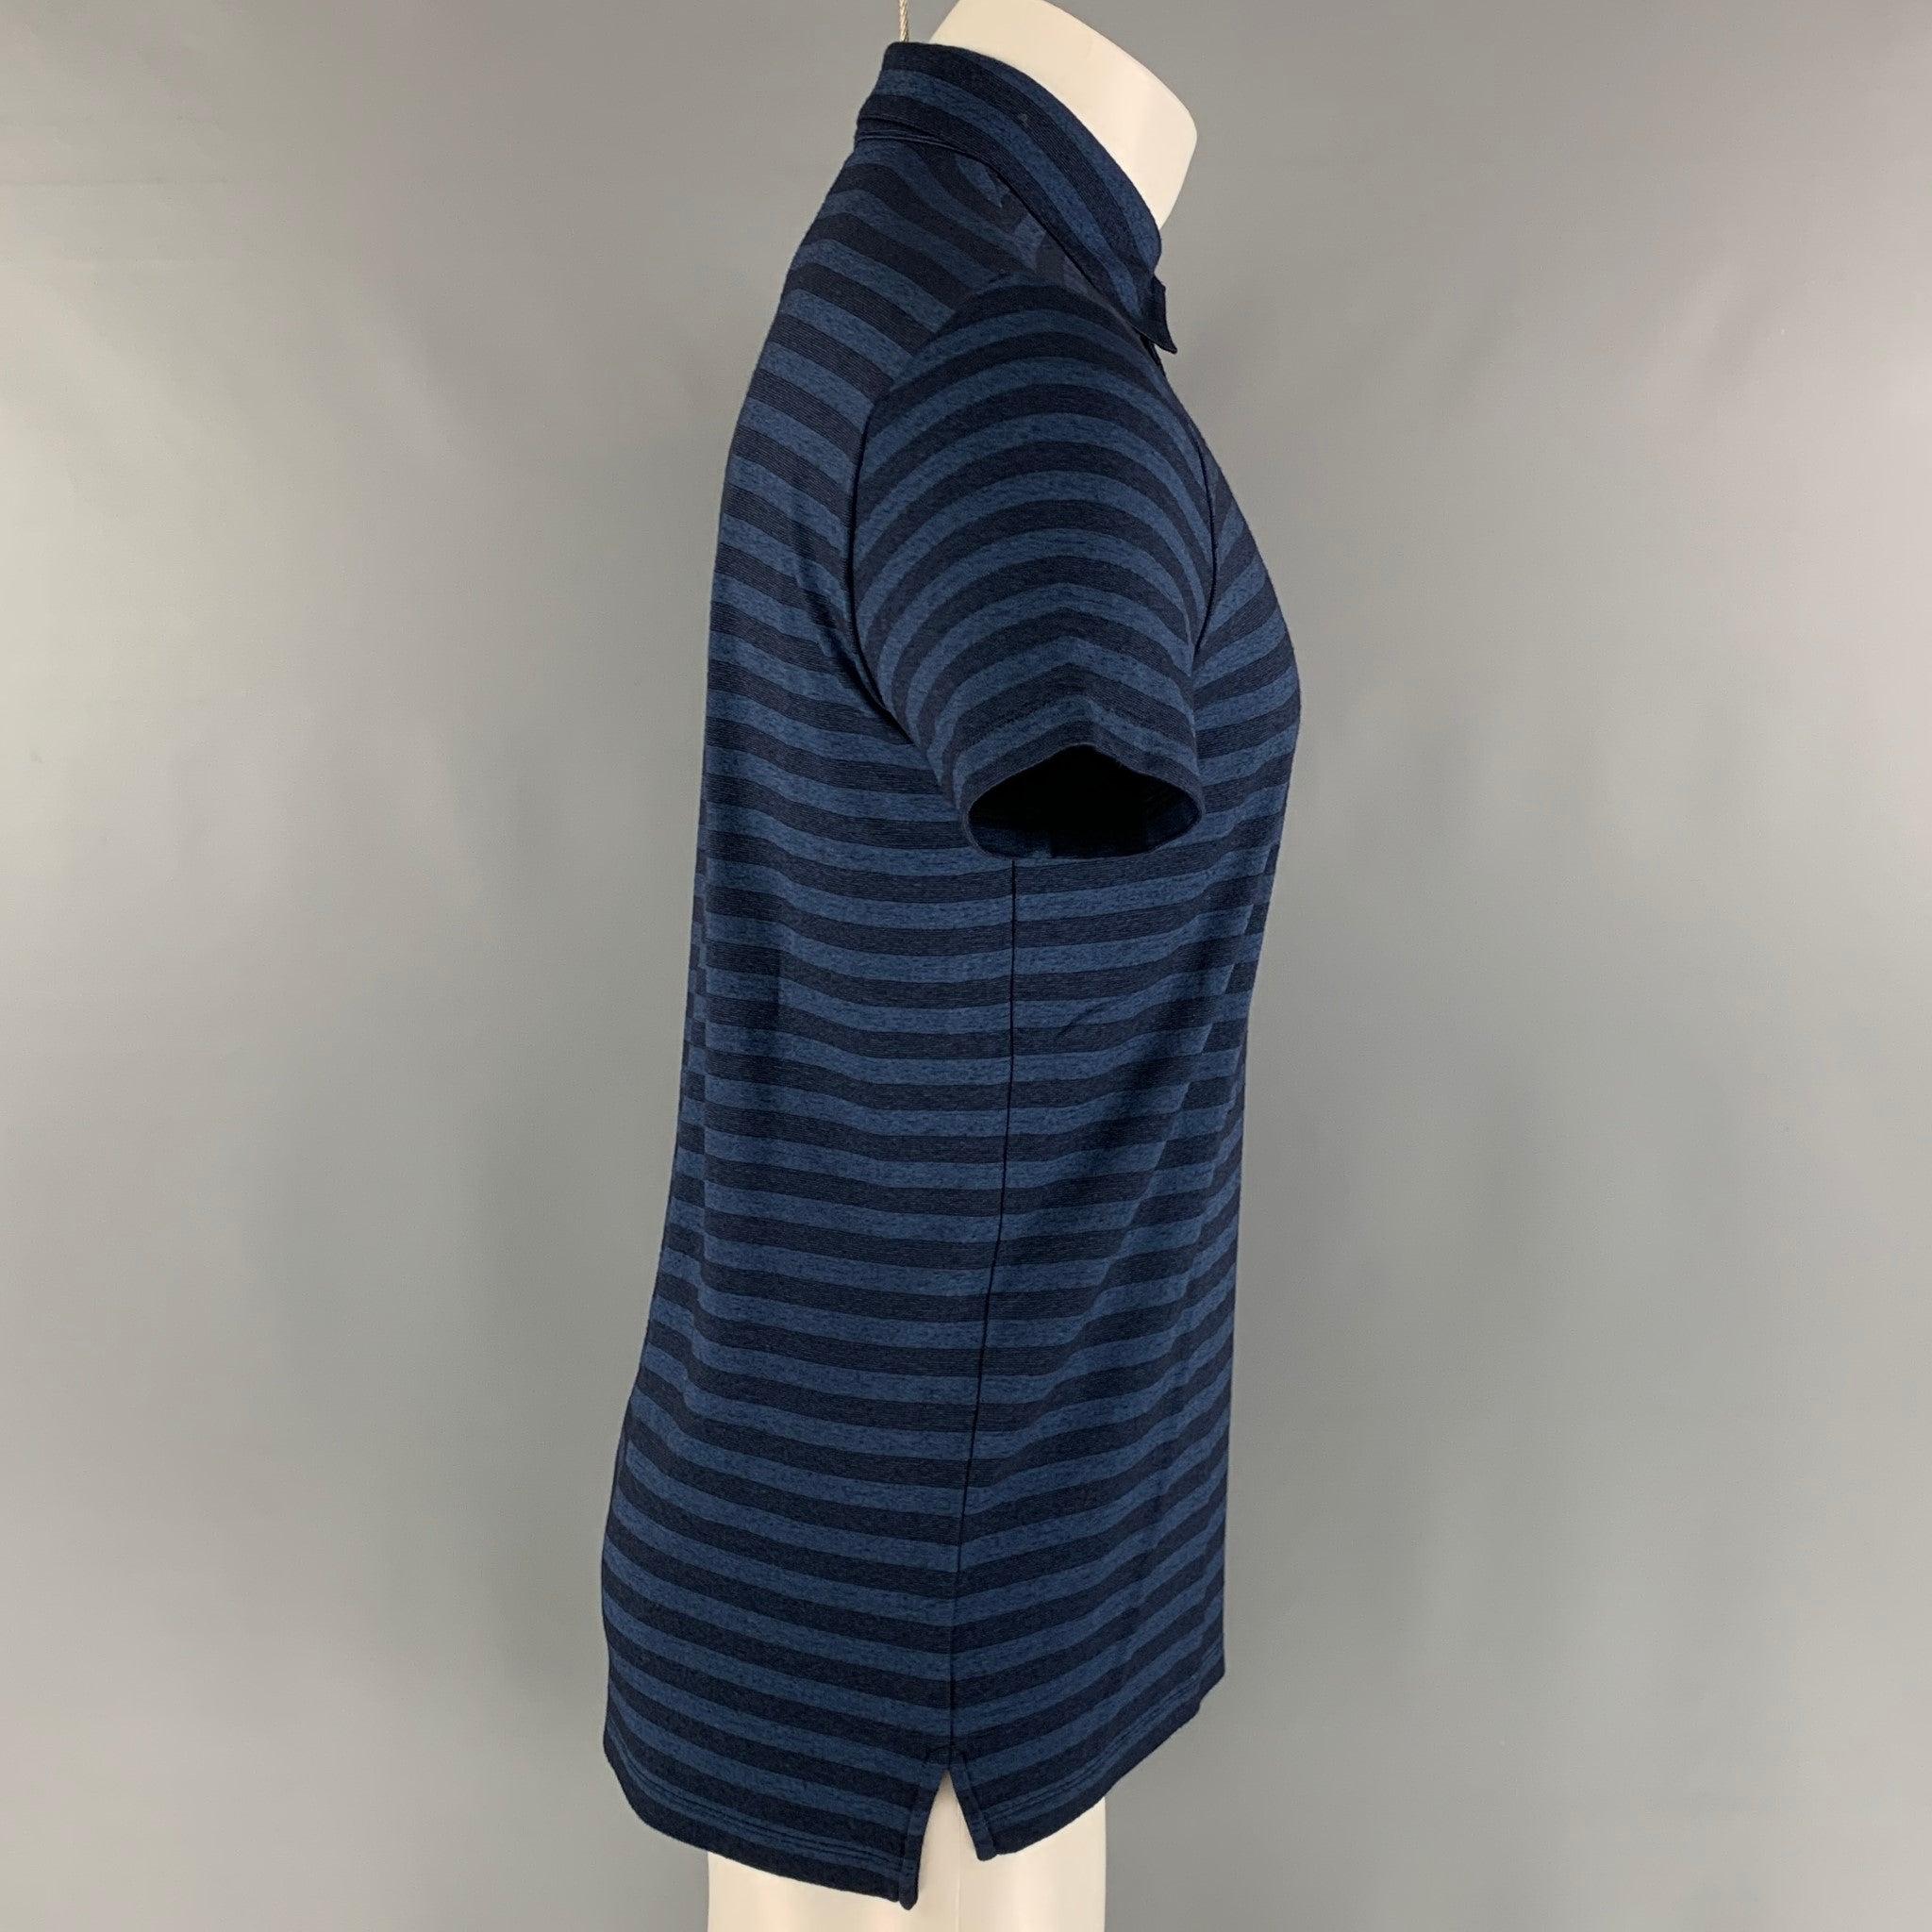 ARMANI COLLEZIONI polo comes in a navy and blue striped viscose blend knit featuring a spread collar, and a half buttoned closure. Excellent Pre-Owned Condition.  

Marked:   M 

Measurements: 
 
Shoulder: 18 inches Chest: 42 inches Sleeve: 8 inches